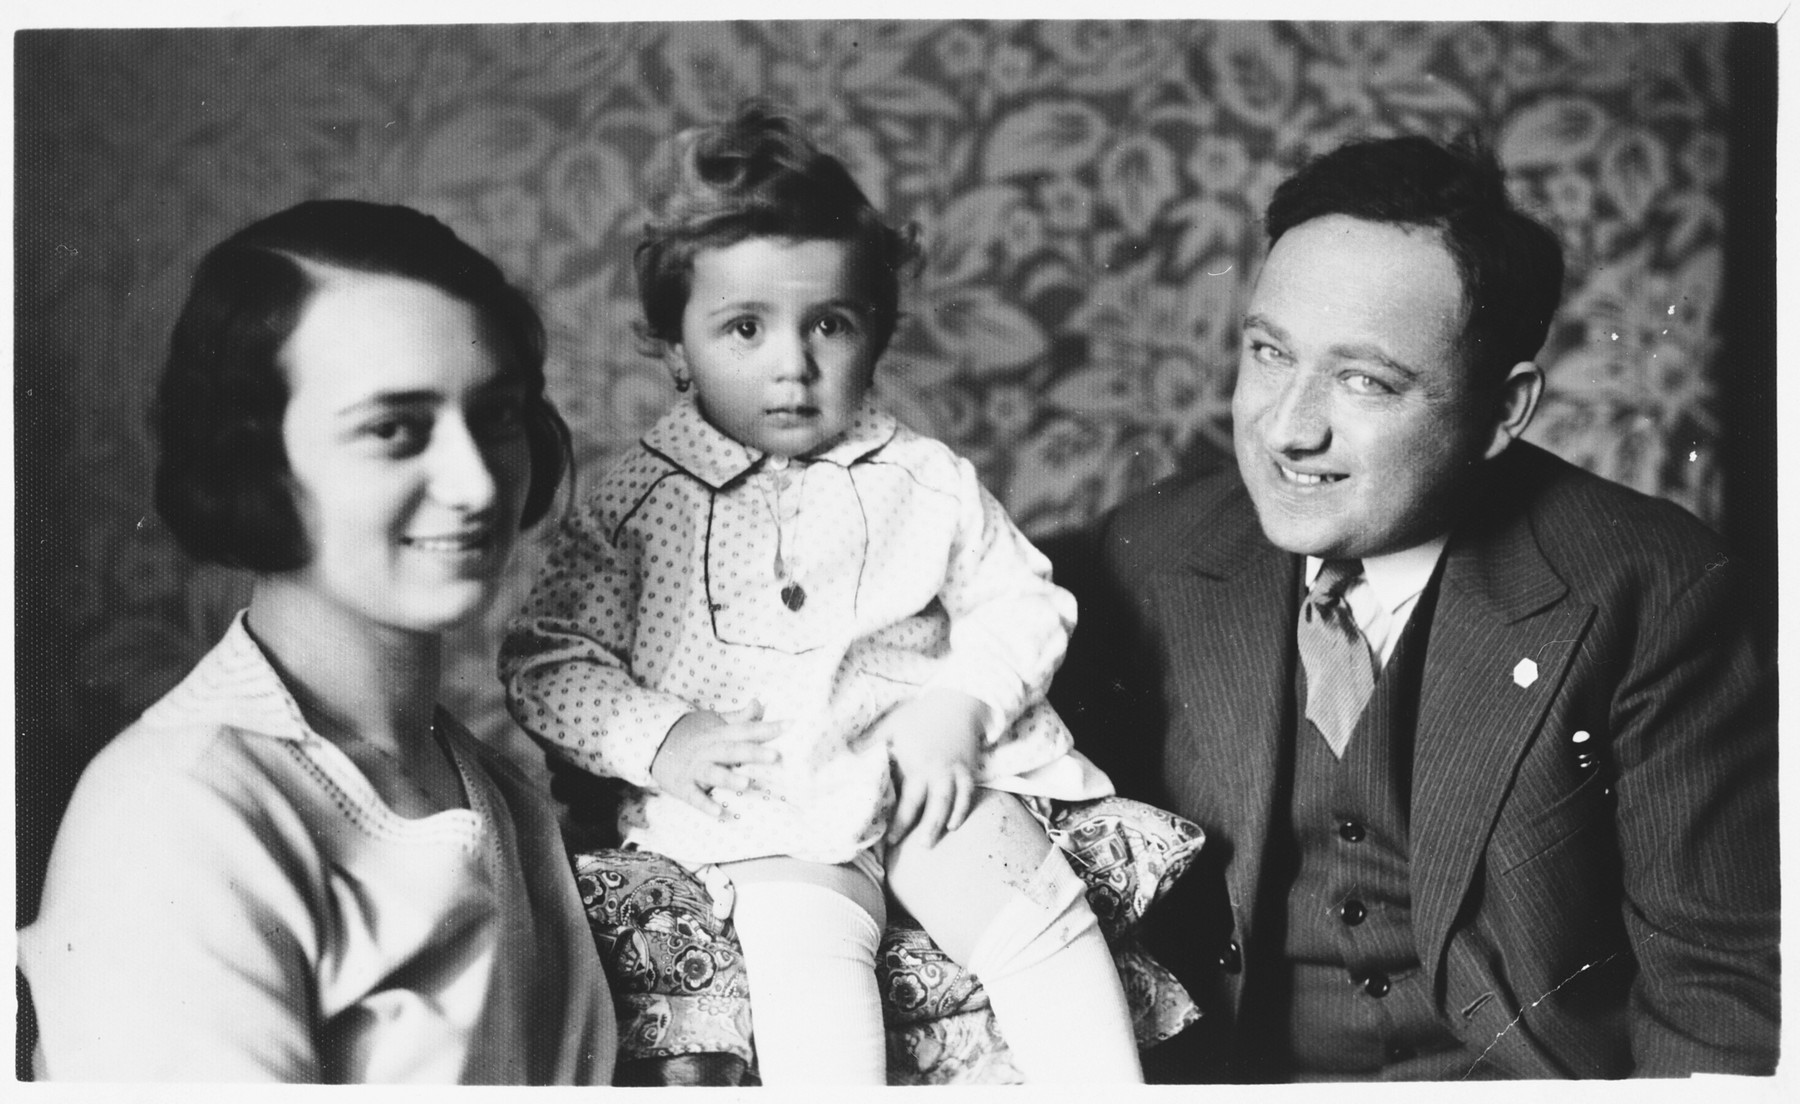 Studio portrait of a Jewish family in Osijek, Croatia.

Pictured are Marko and Ilonka Spitzer with their young daughter, Miriam.